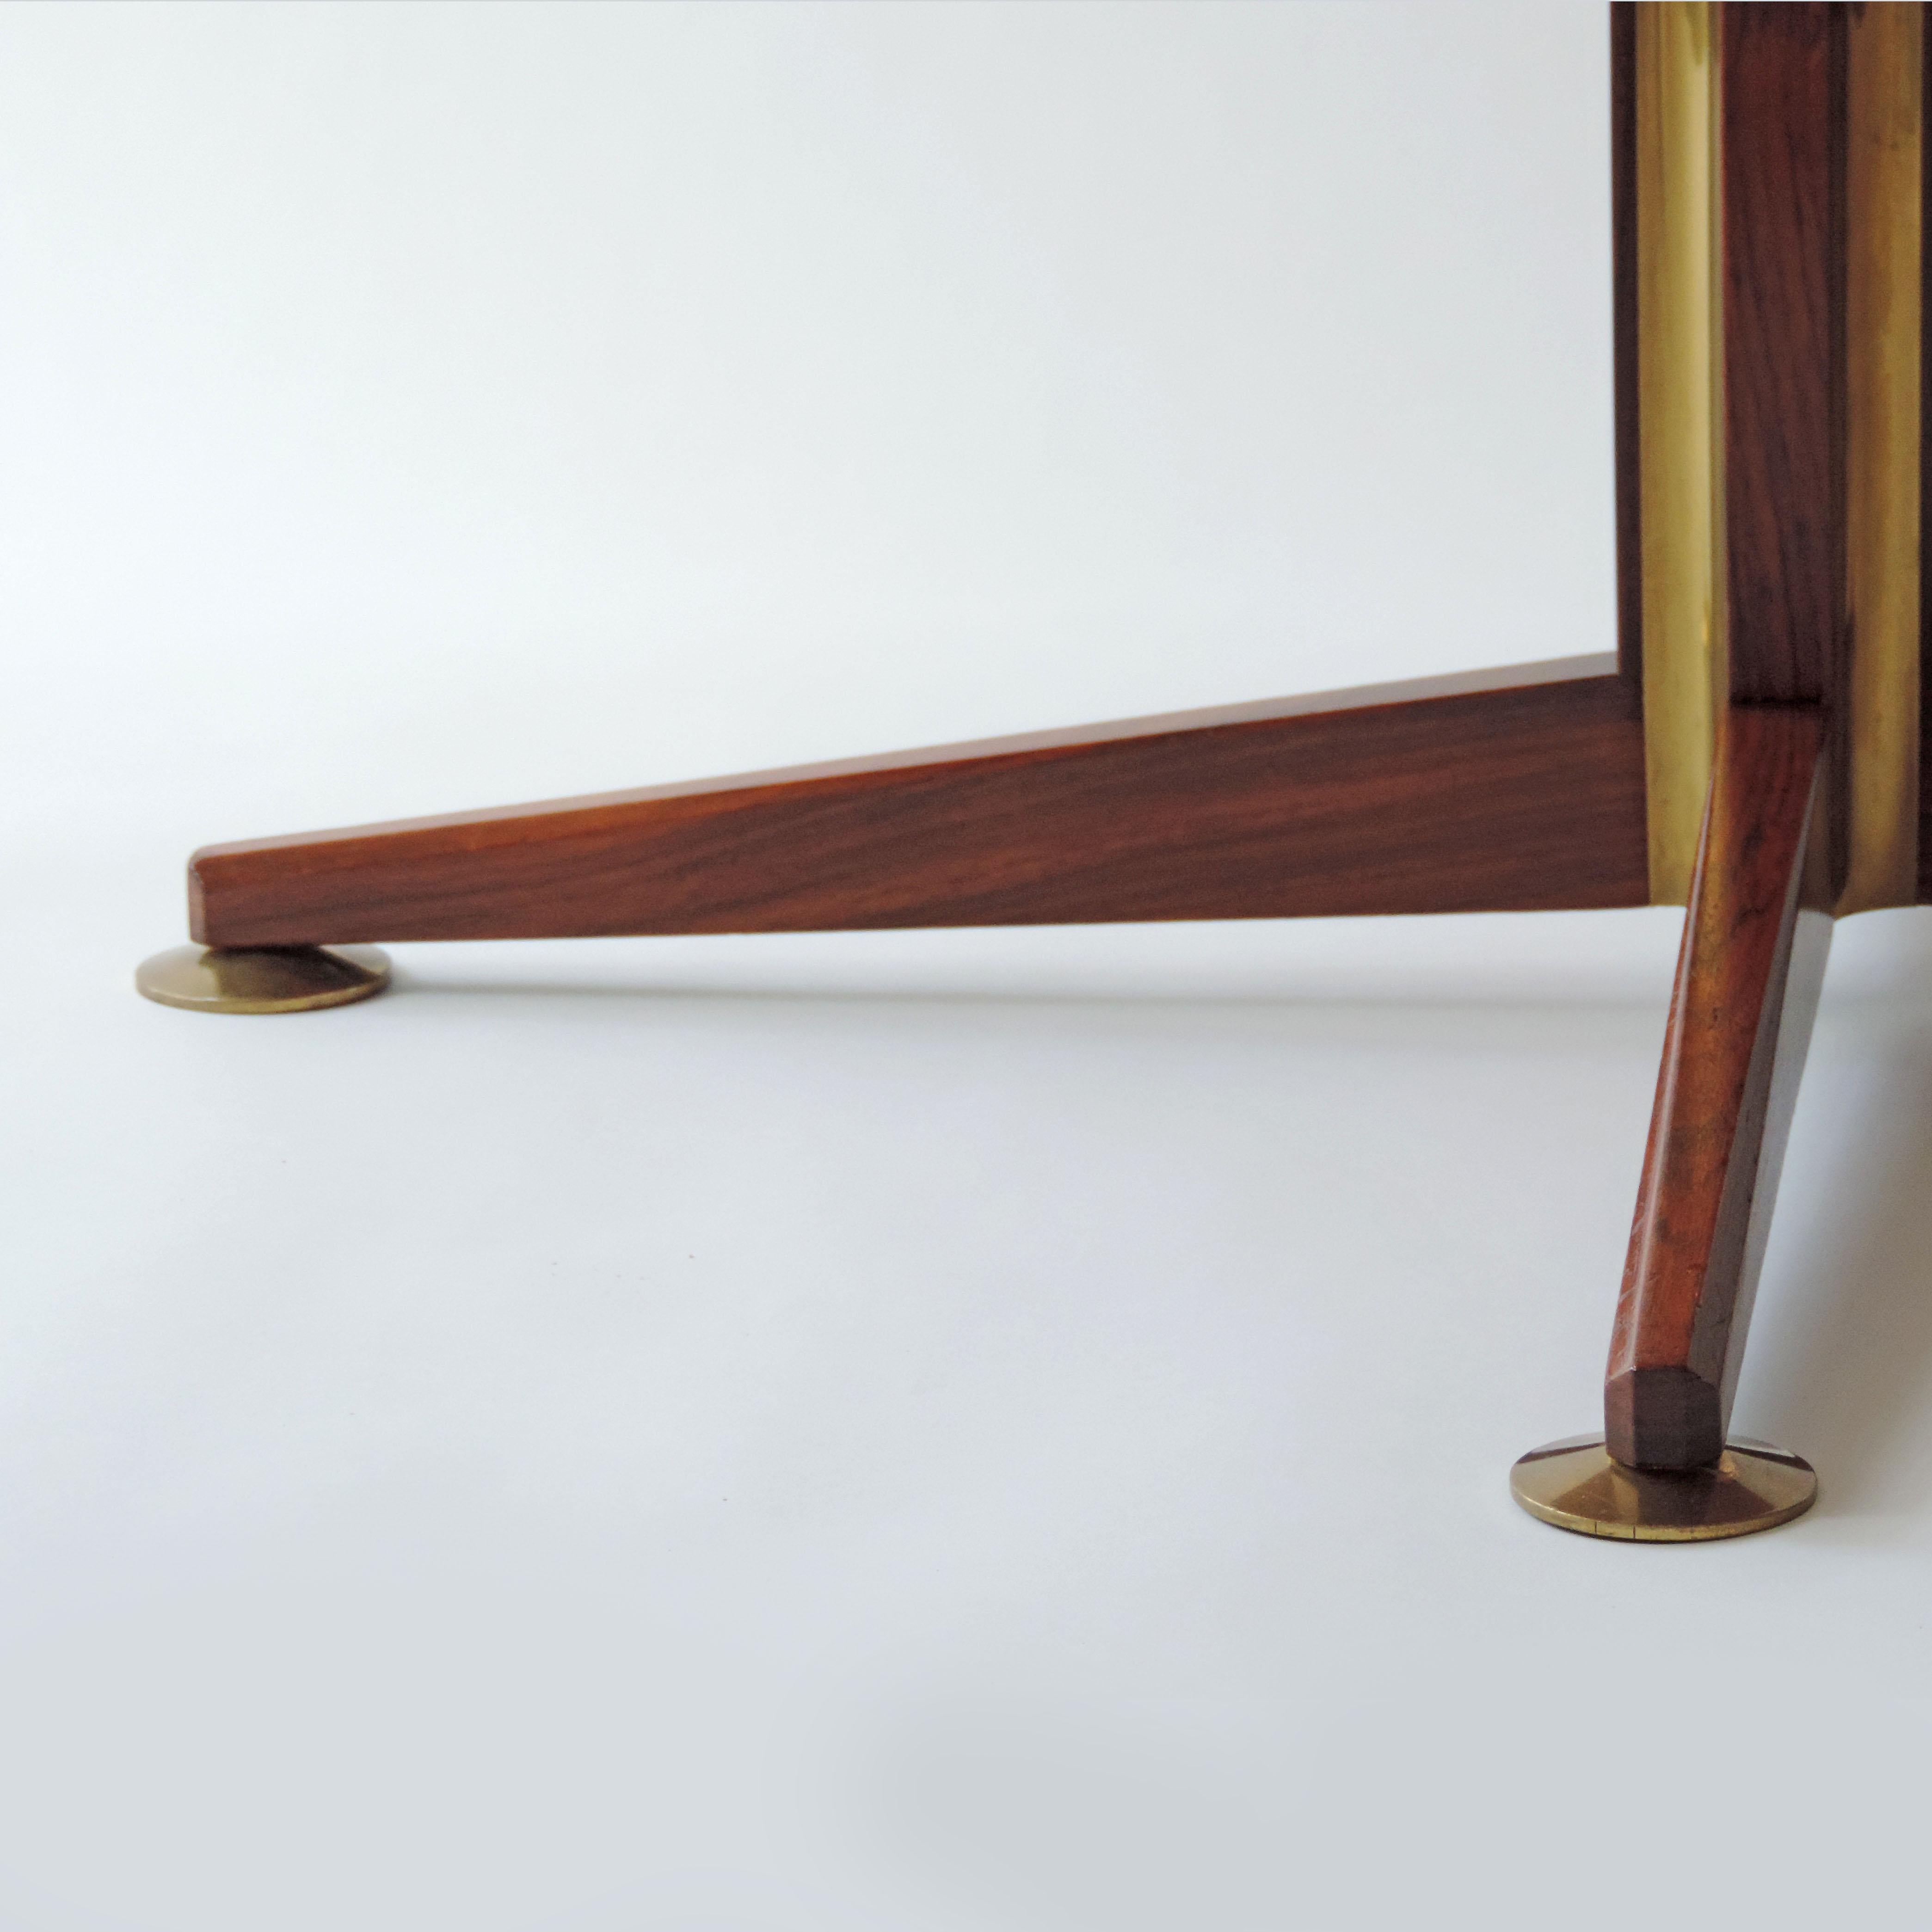 Osvaldo Borsani circular dining table in wood and brass details, Italy, 1960s For Sale 4